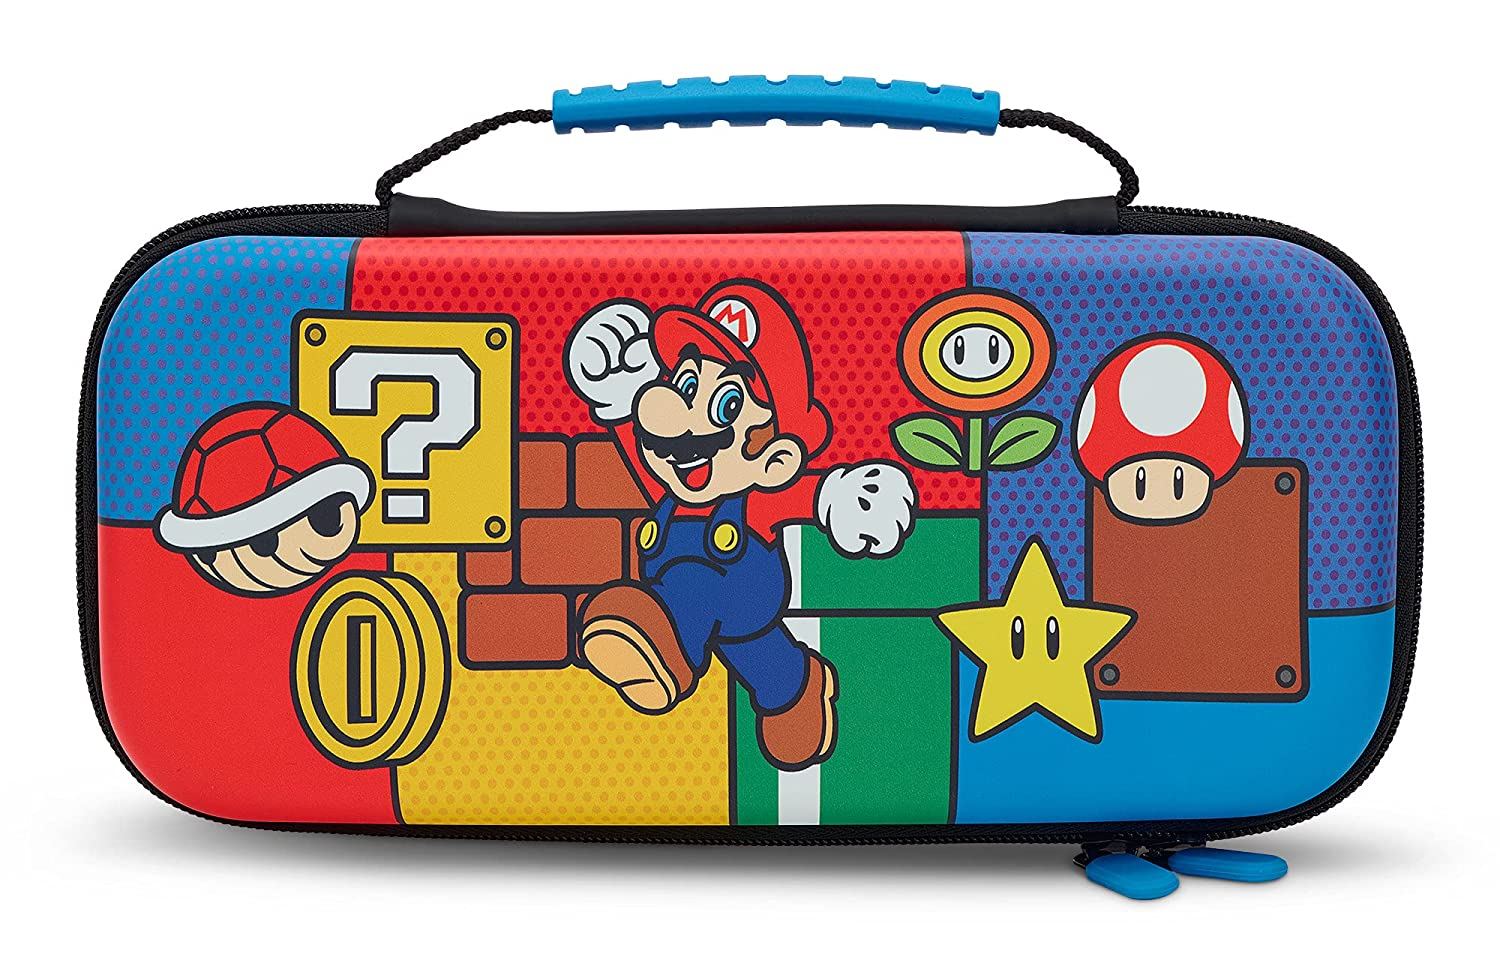 Citere udtale dommer Protection Case for Nintendo Switch (Mario Pop) for Nintendo Switch